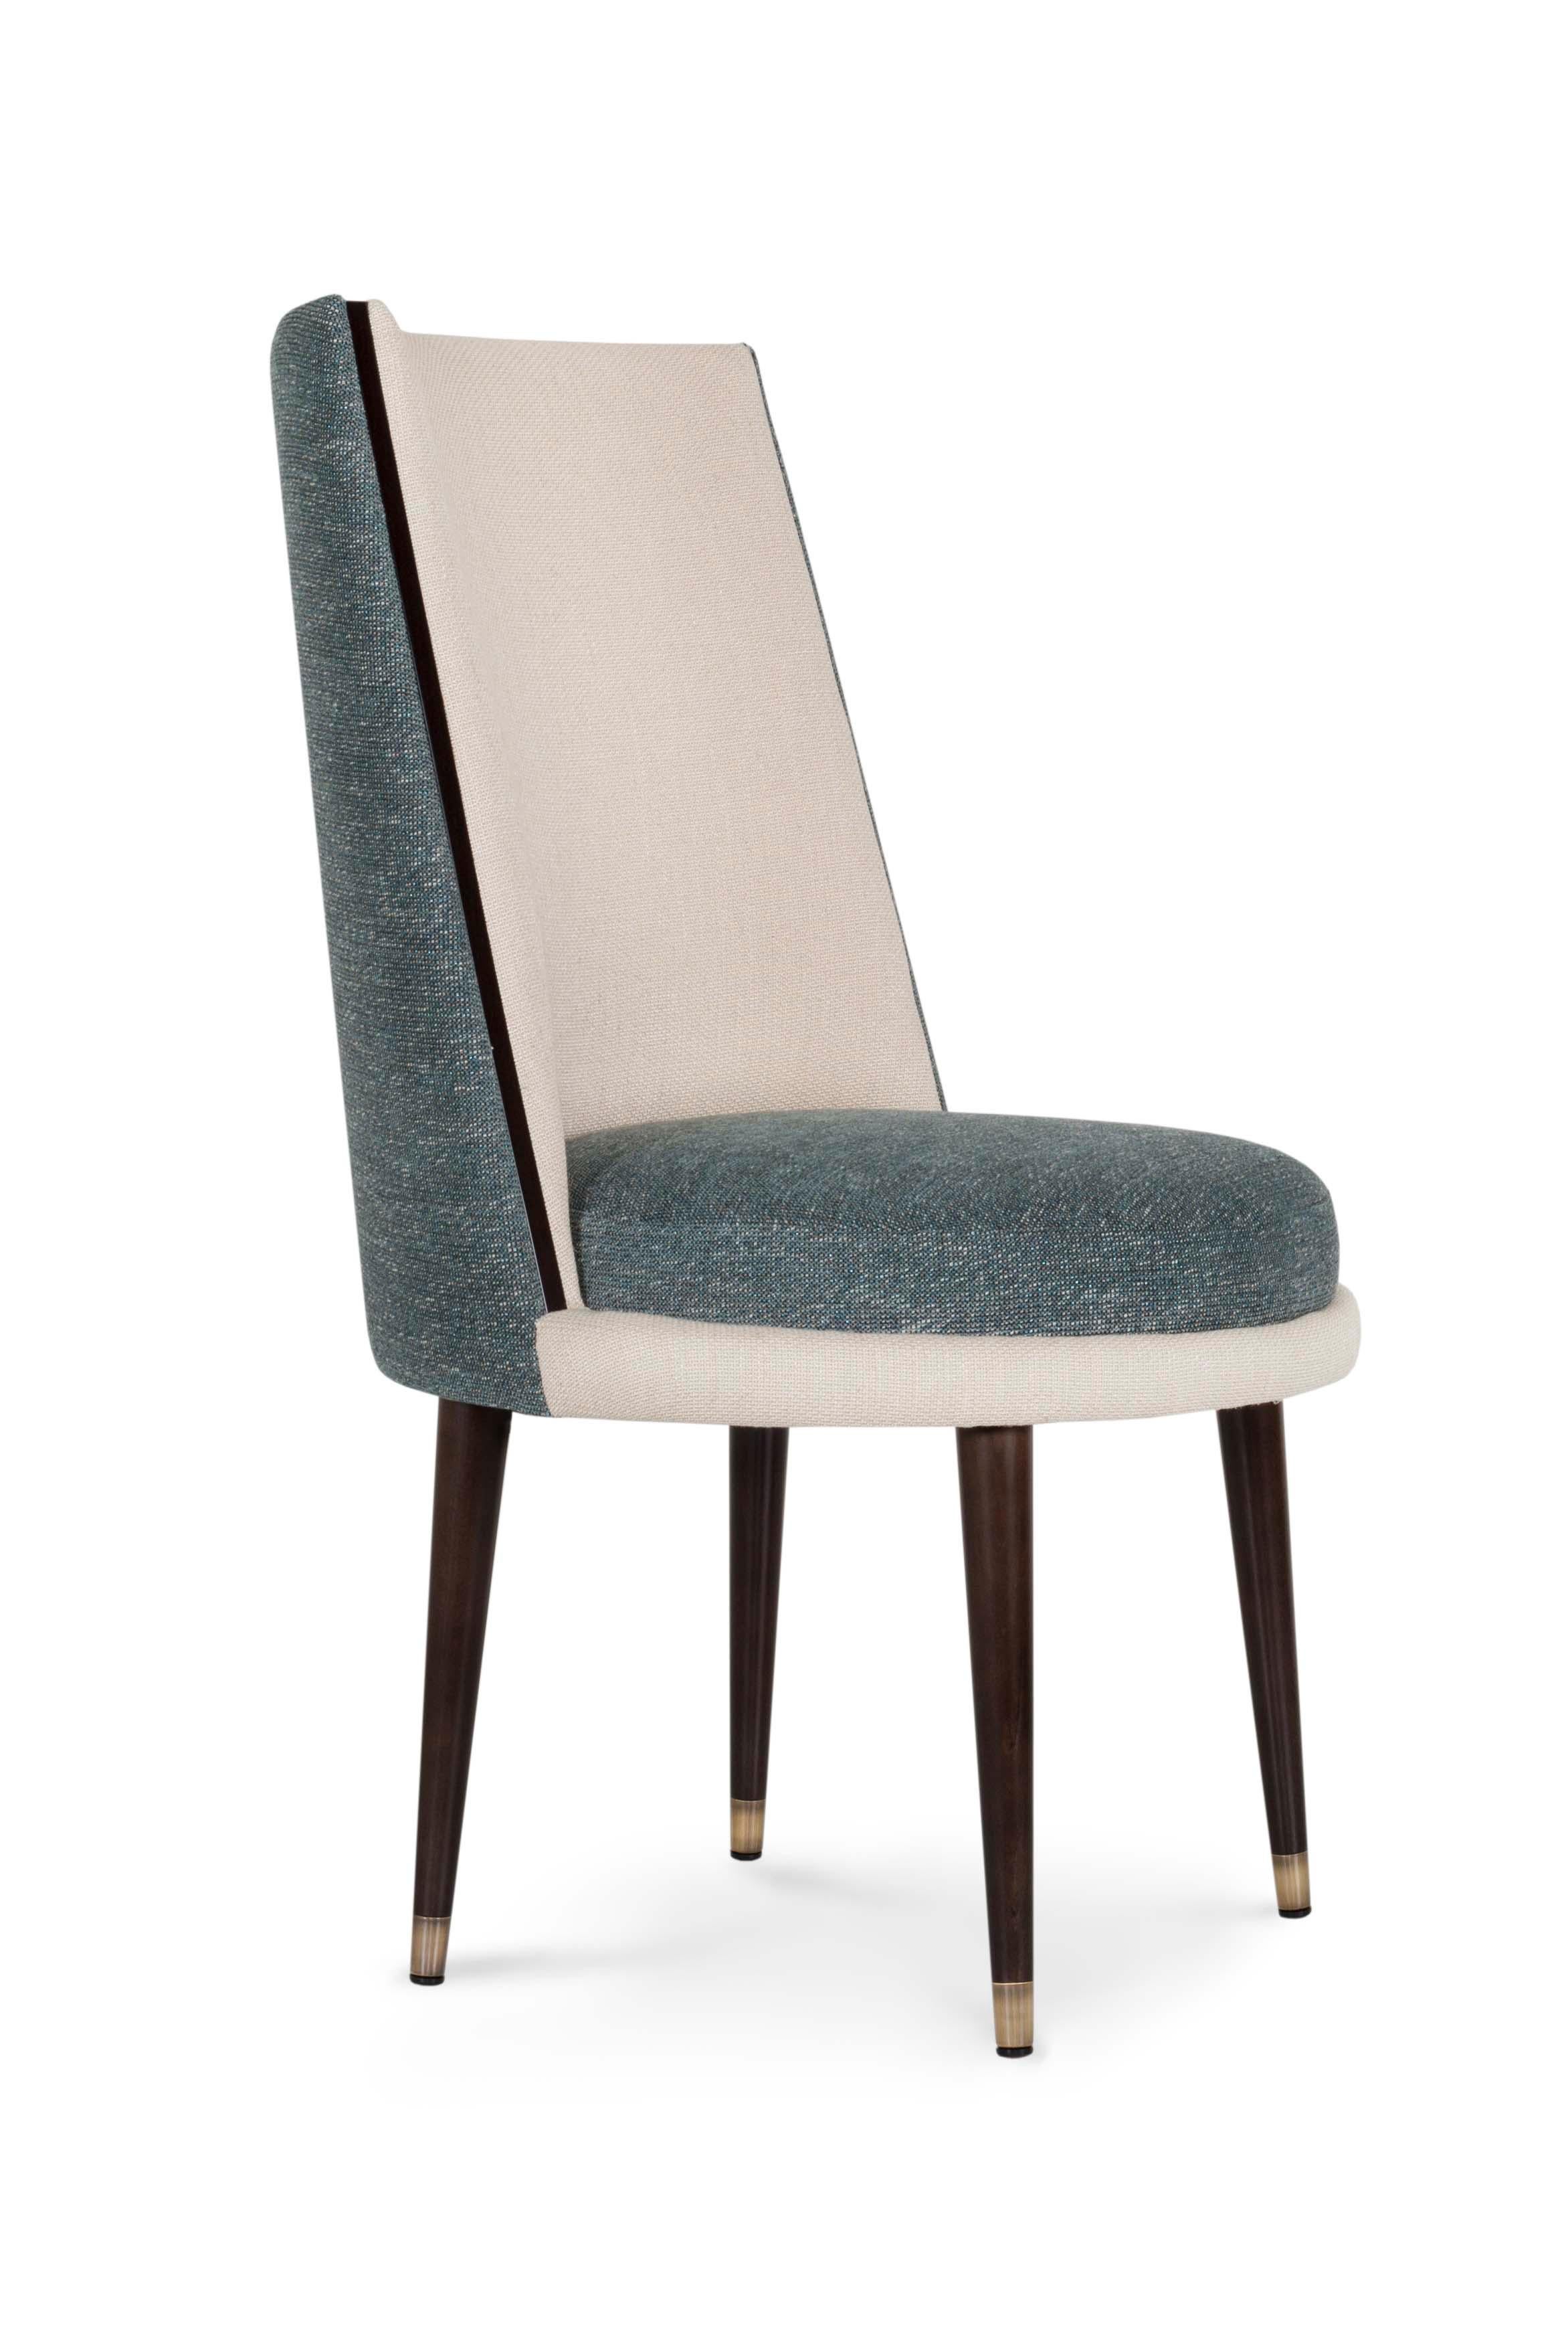 Modern De Castro Dining Chair, Blue Beige Woven, Handmade Portugal by Greenapple For Sale 1